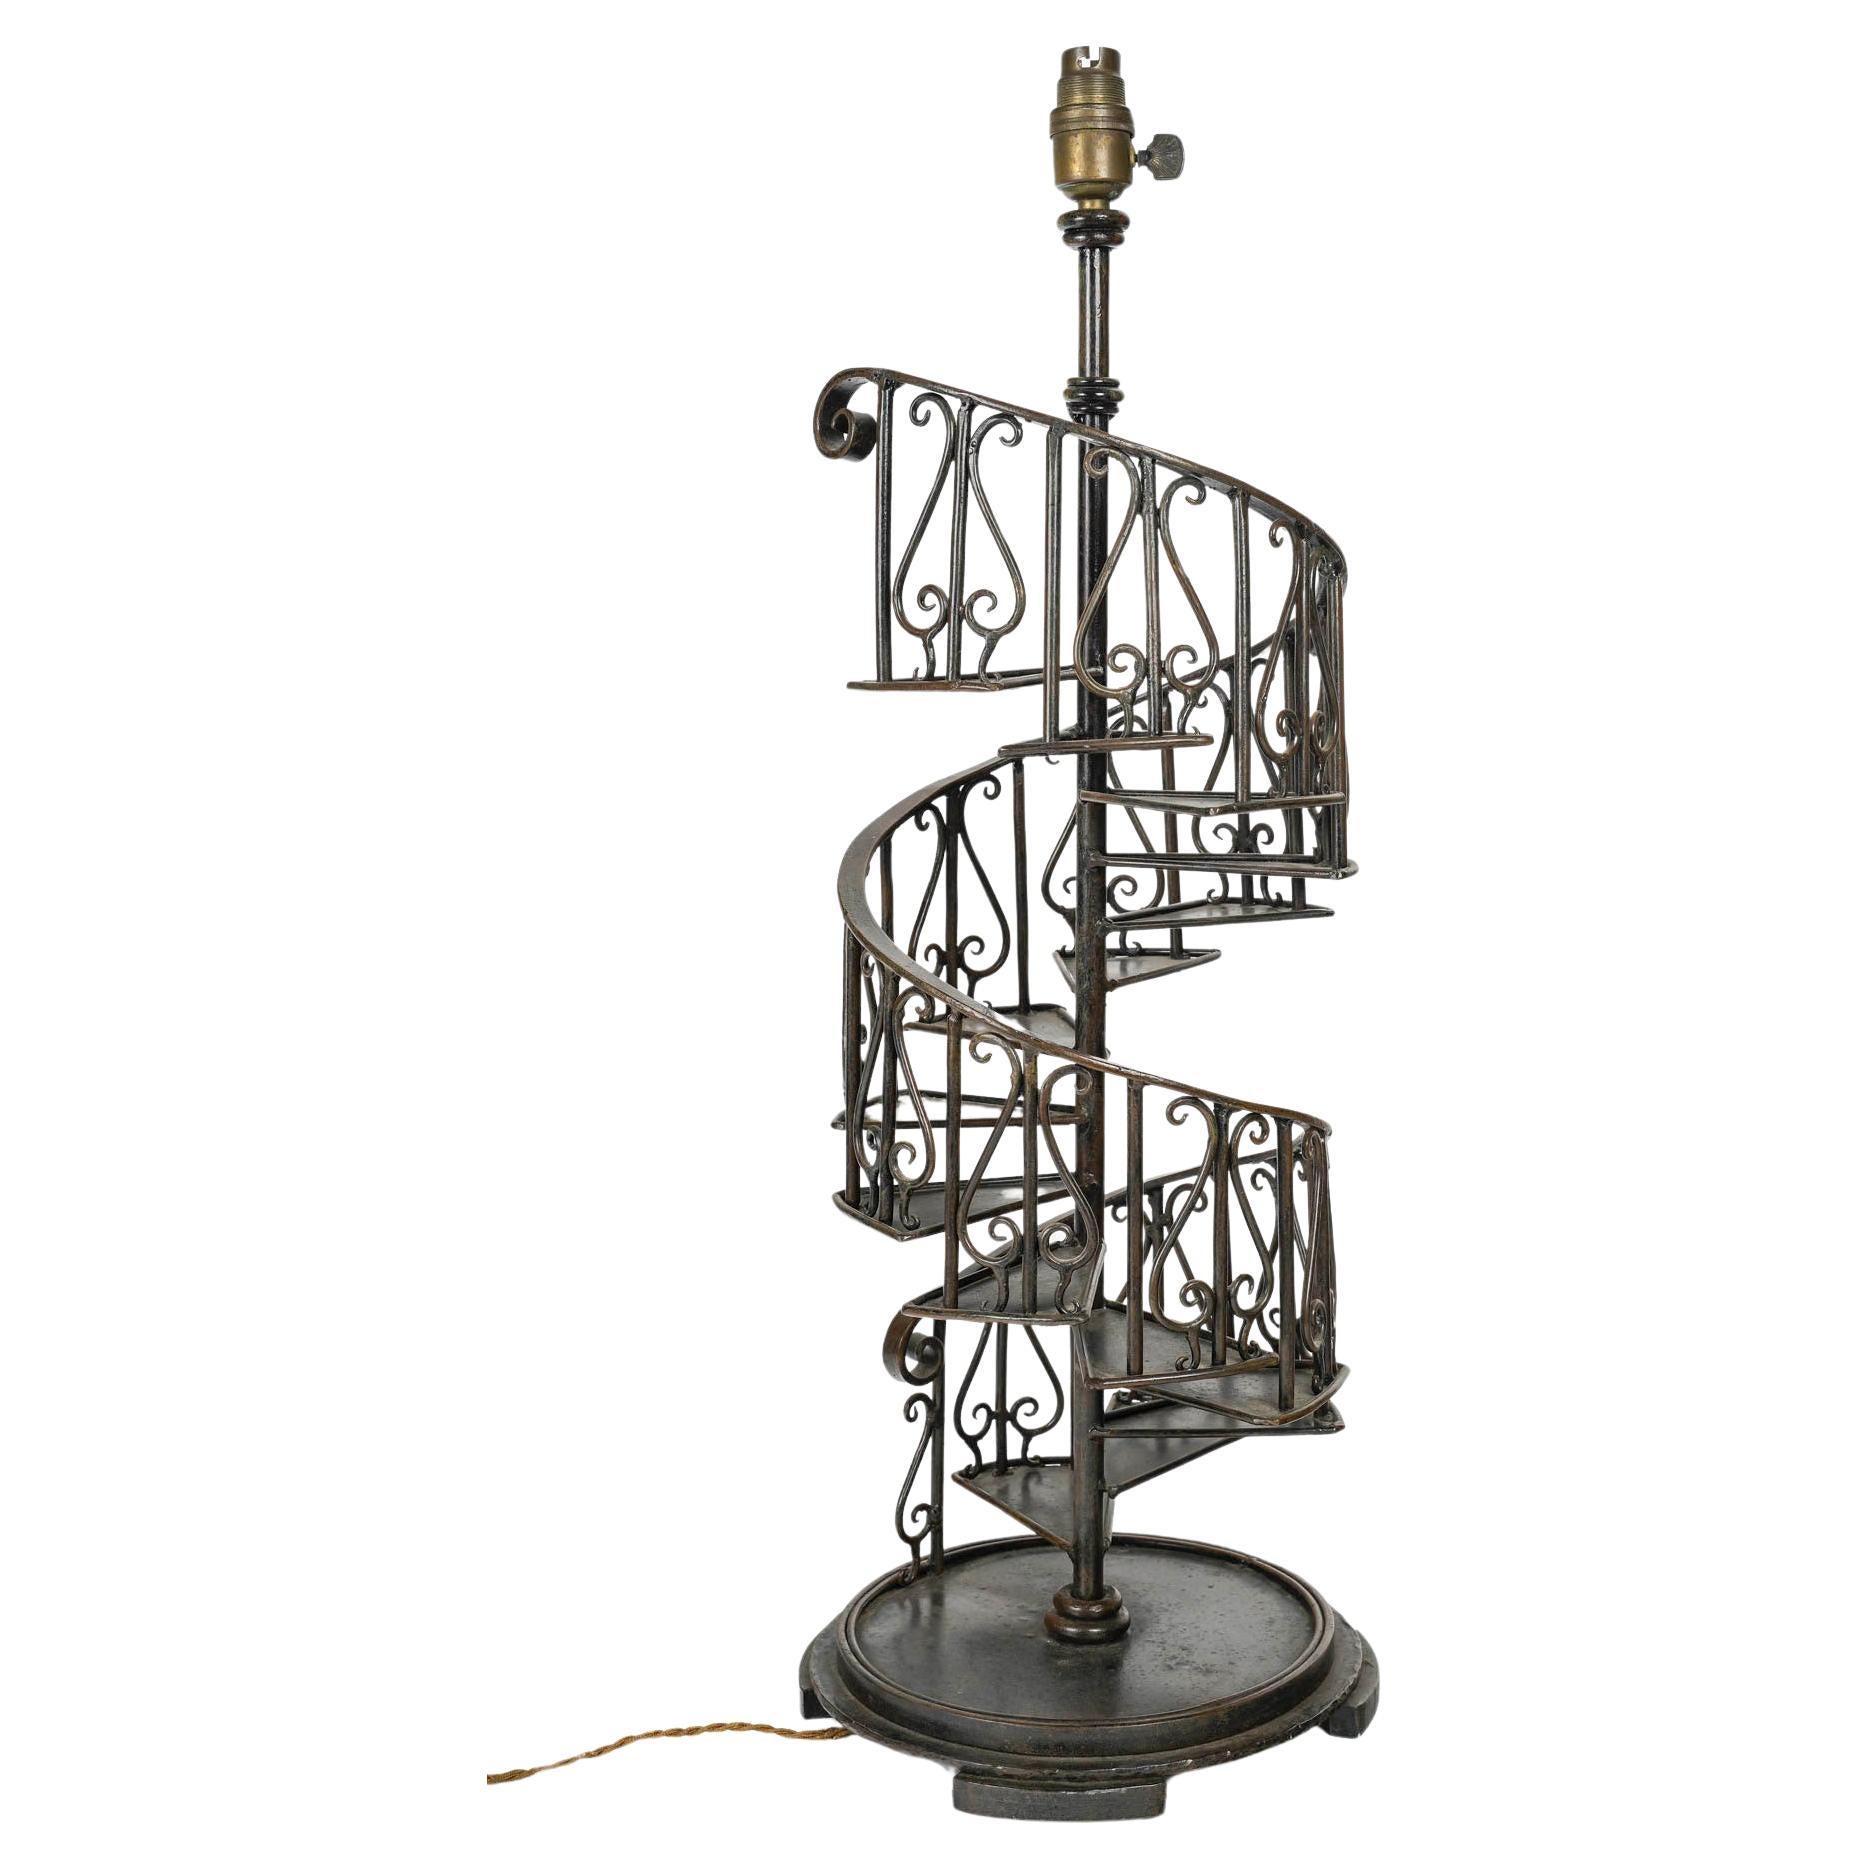 Spiral Staircase Table Lamp in Brown Patinated Metal, 20th Century.